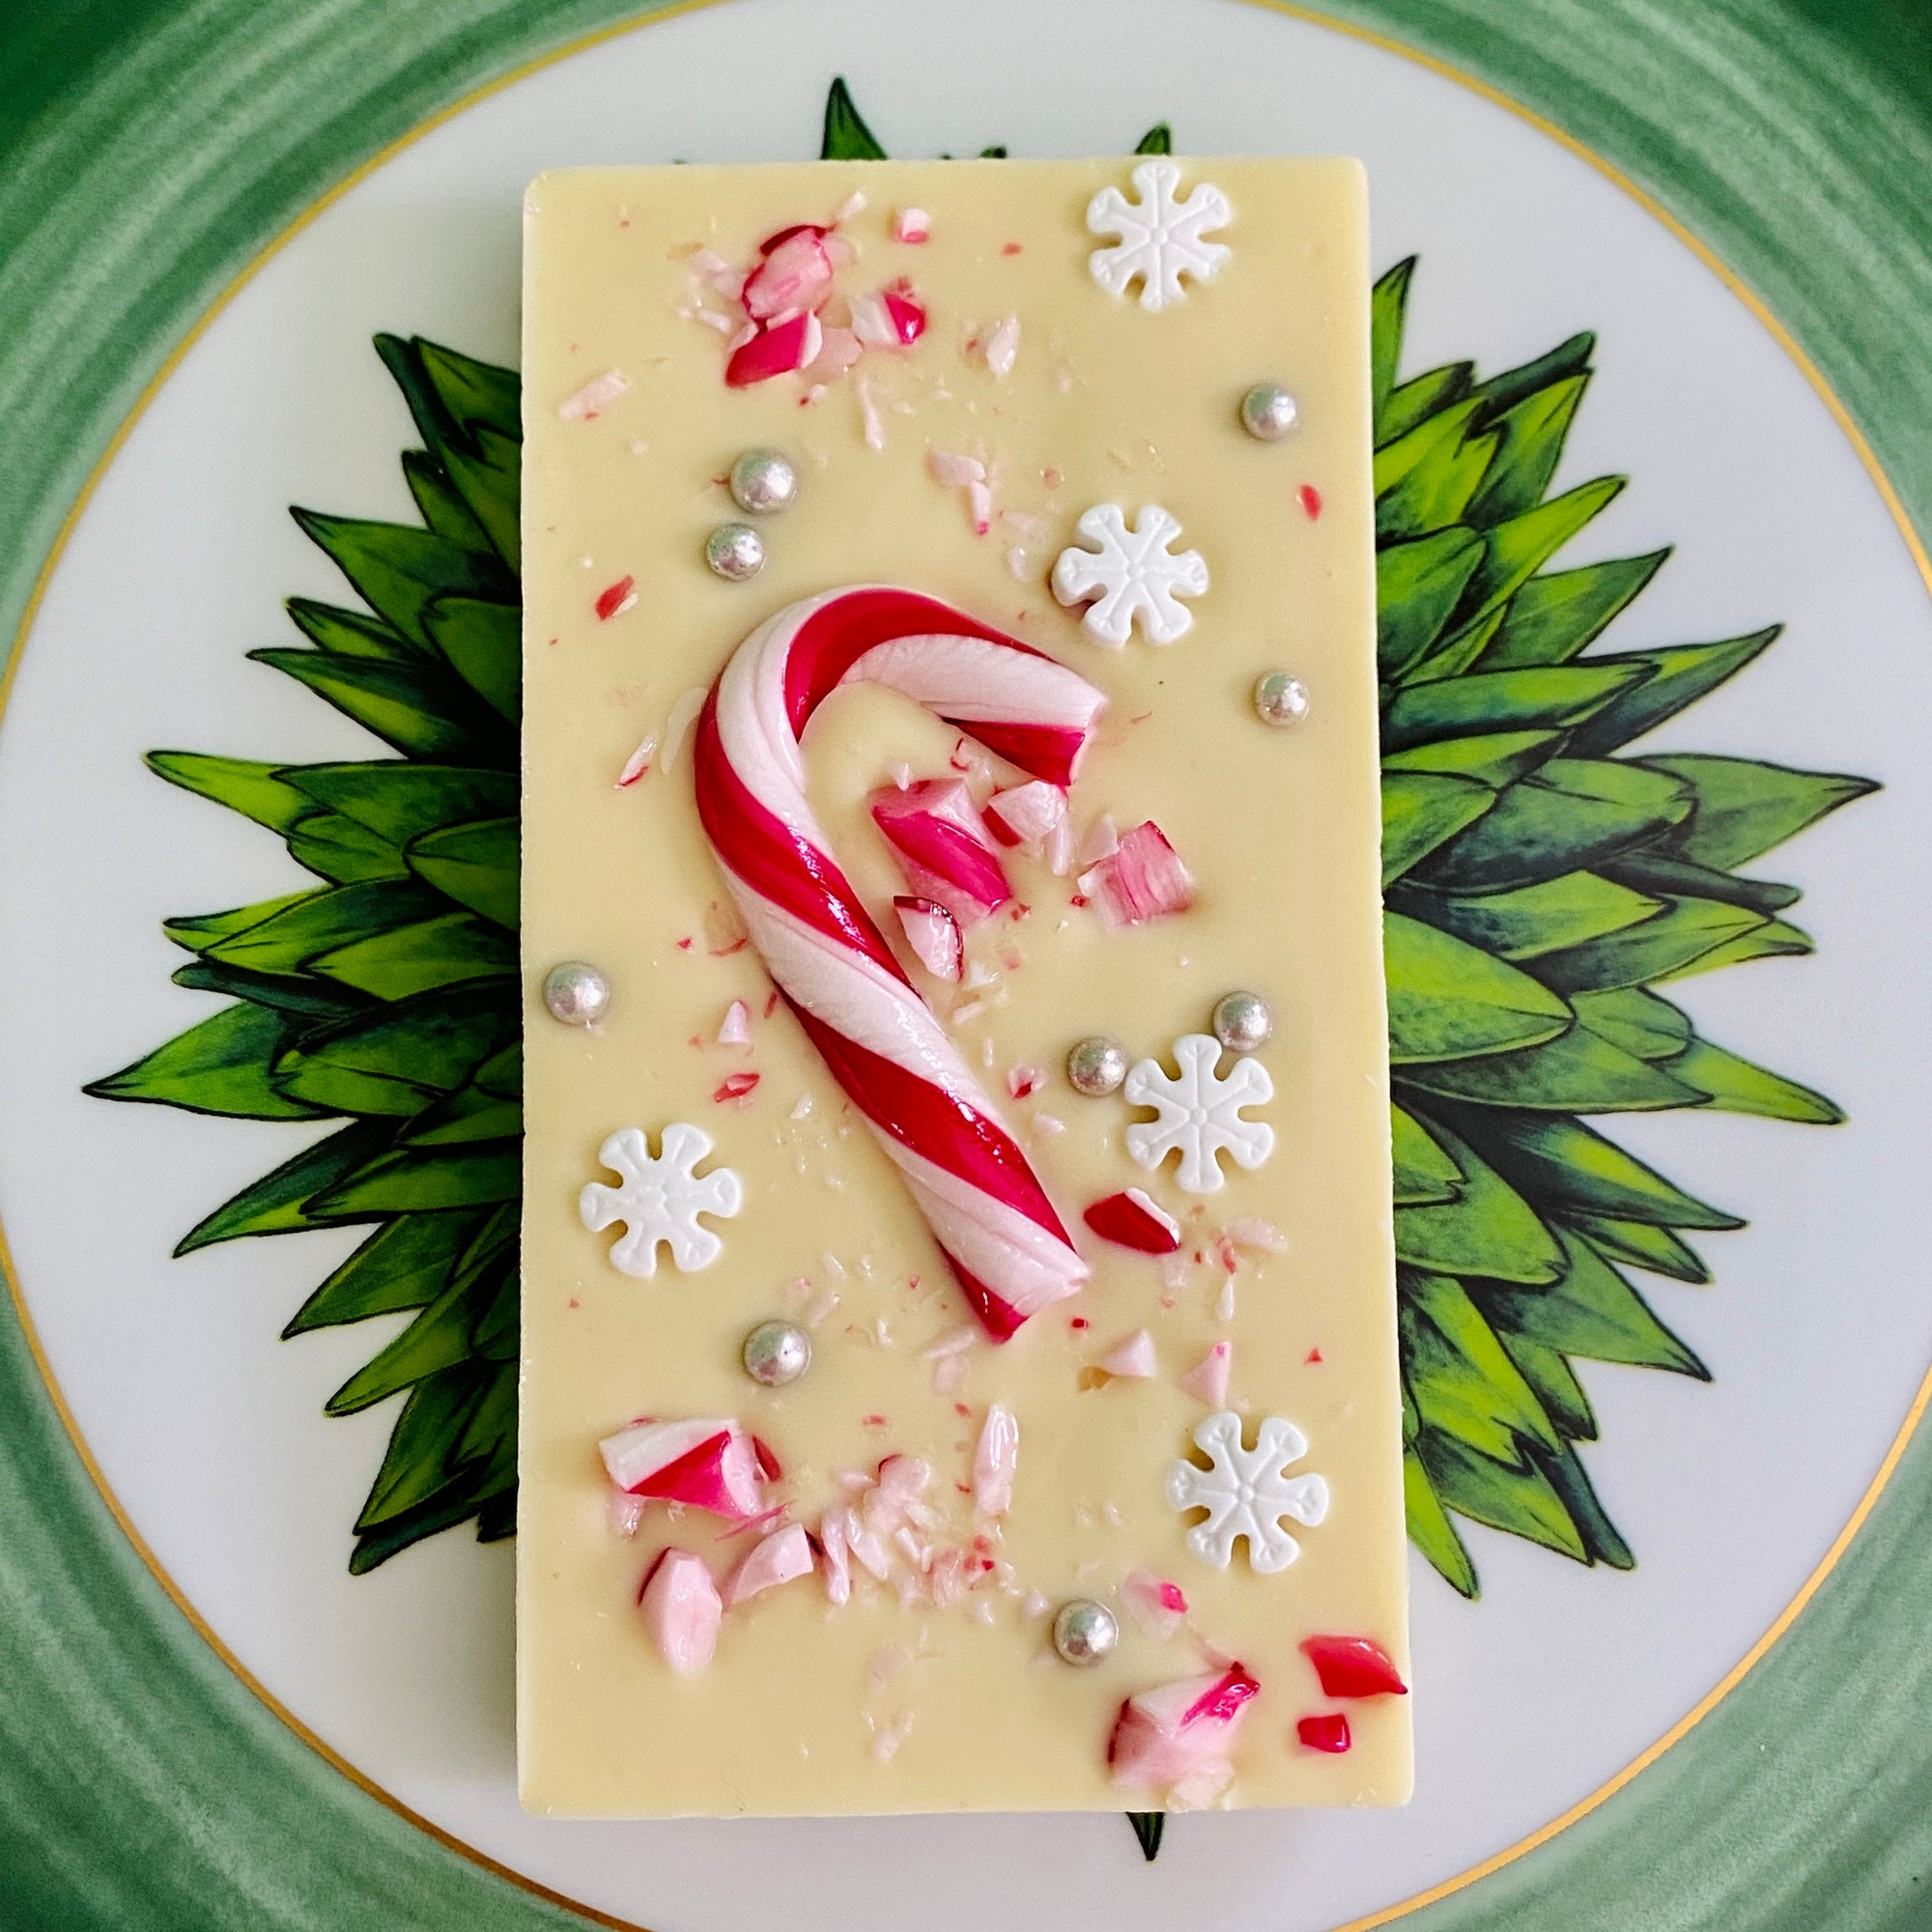 Snowy Peppermint Bliss - A single 110g white Belgian chocolate bar adorned with candy canes, silver sugar balls, and snowflakes